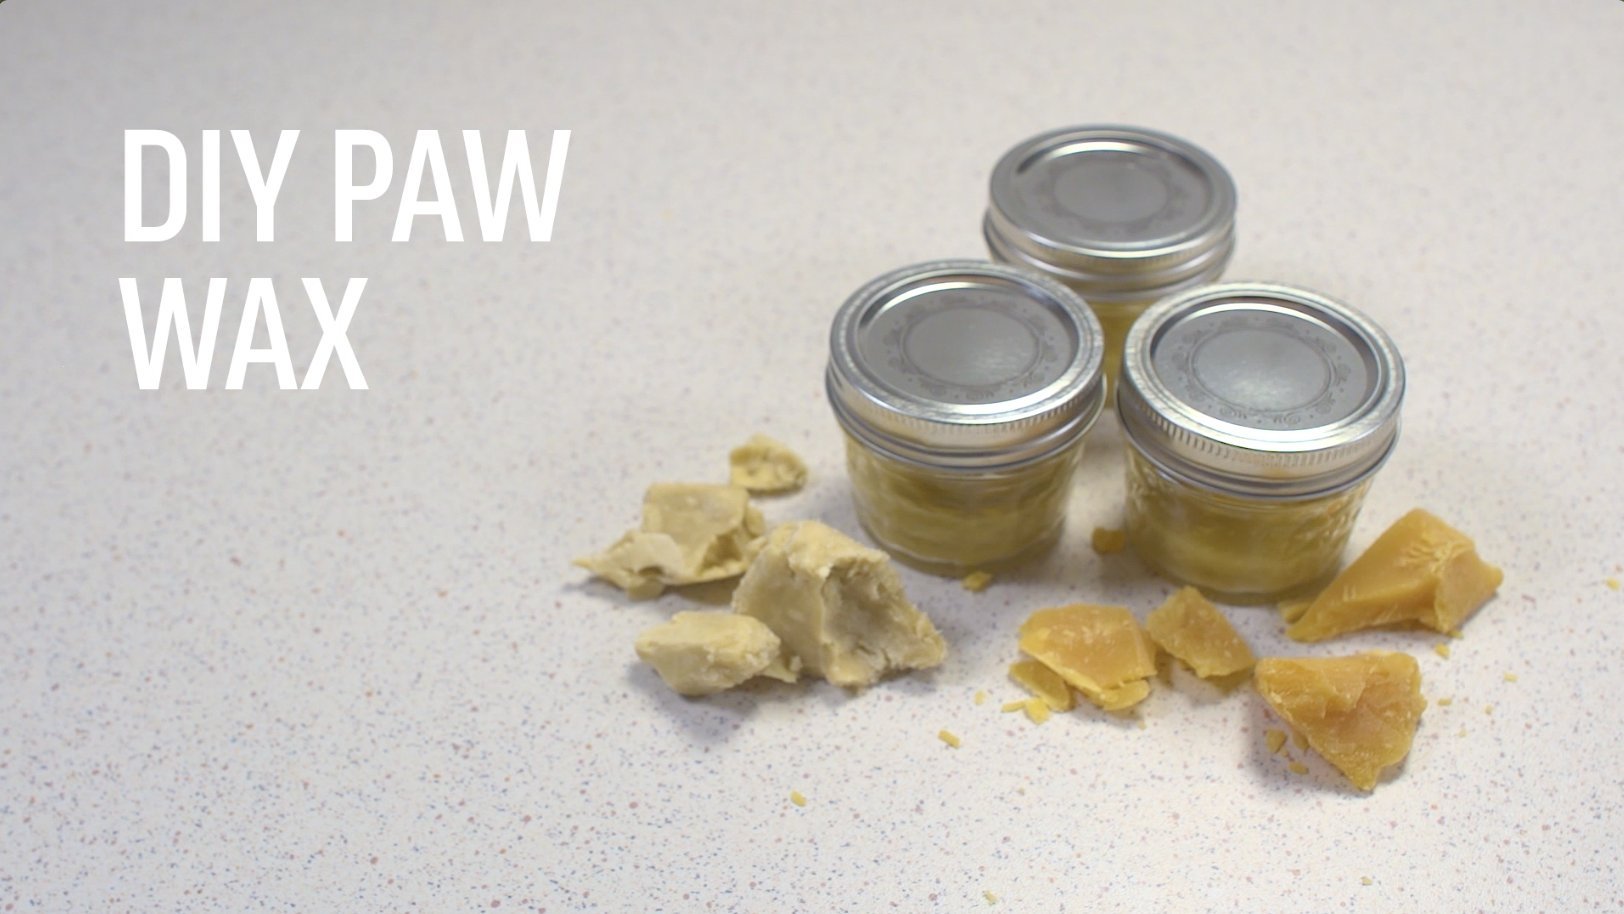 Make Your Own Dog Paw Wax